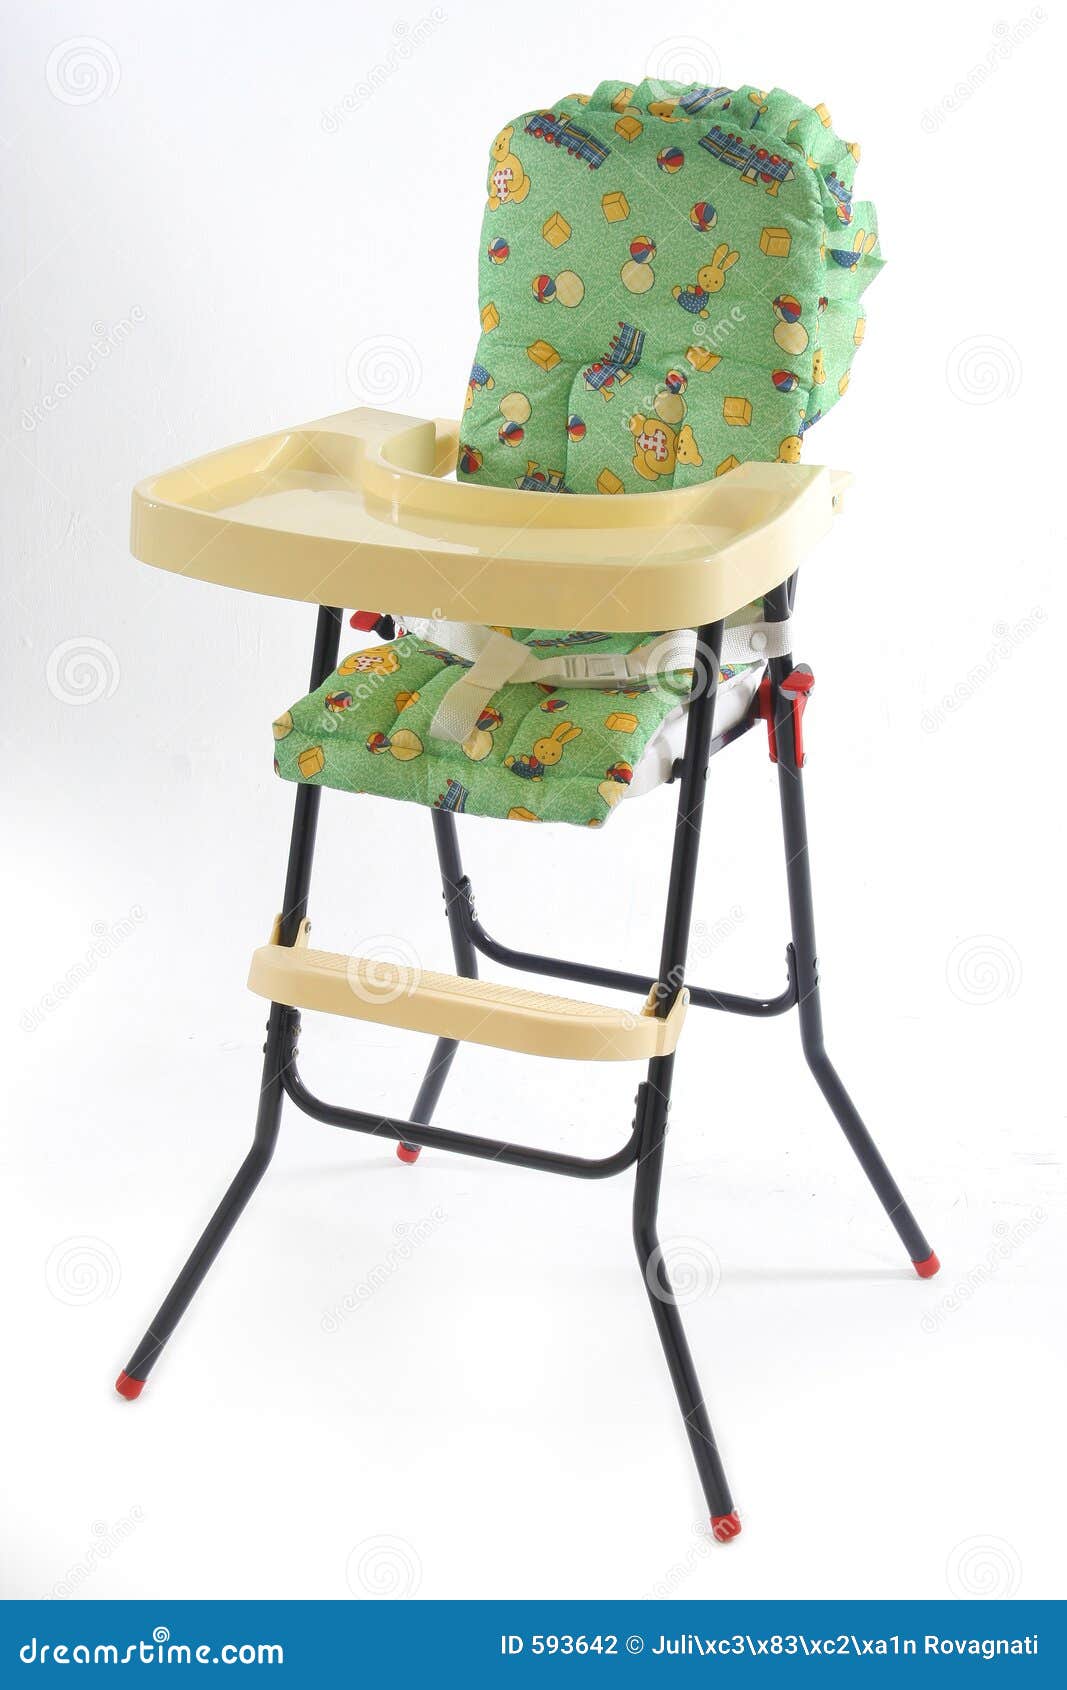 Baby Eating Chair Stock Photography Image 593642